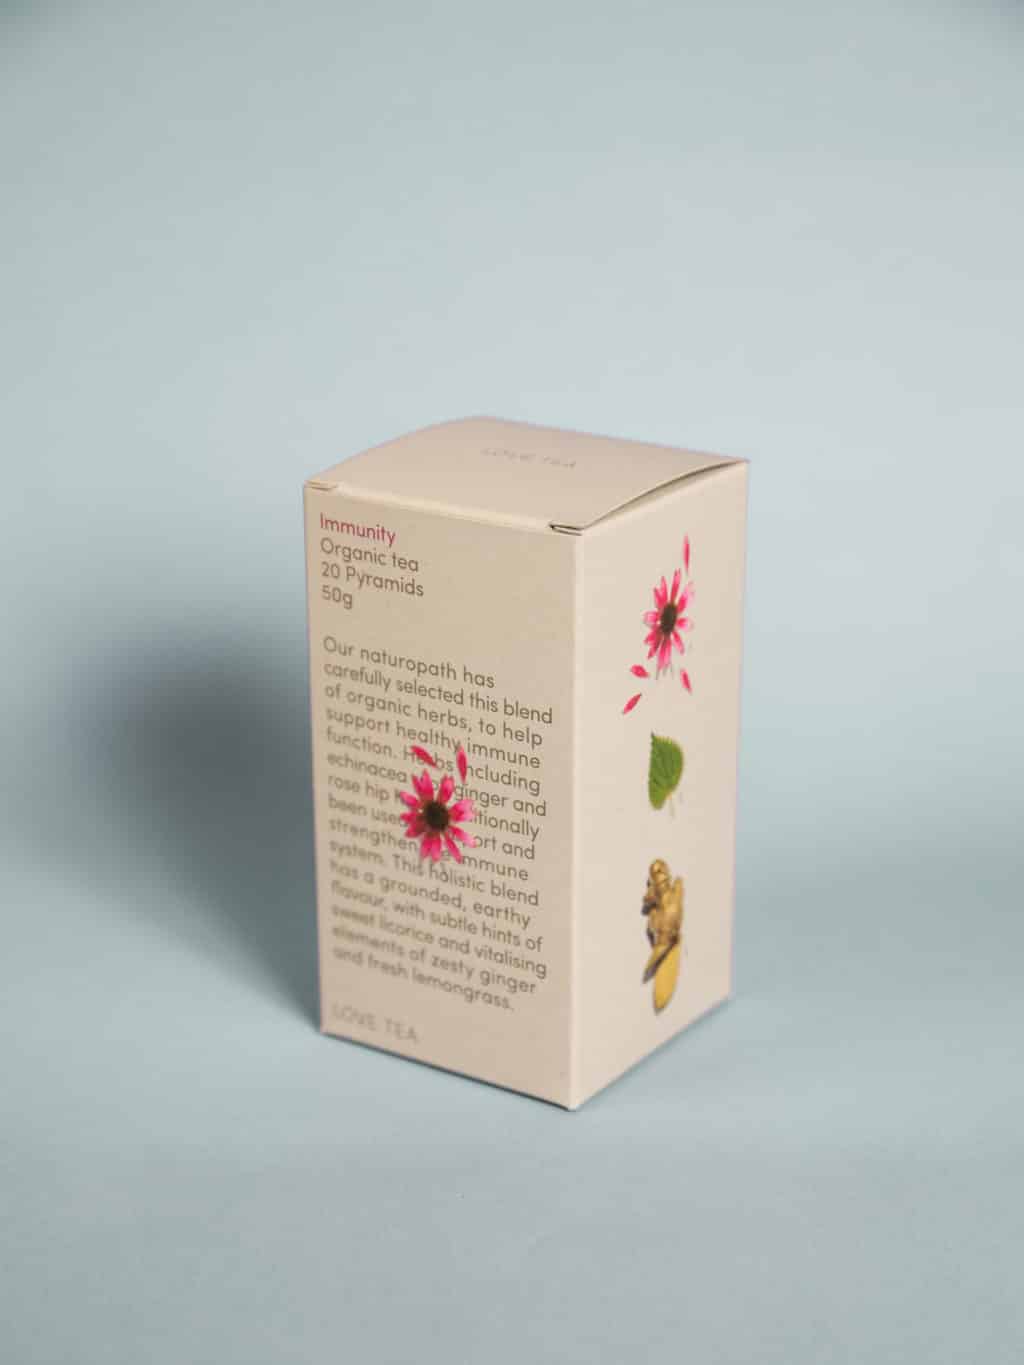 Organic tea in a box. A beautiful gift at our boutique, Wagga Wagga florist shop.